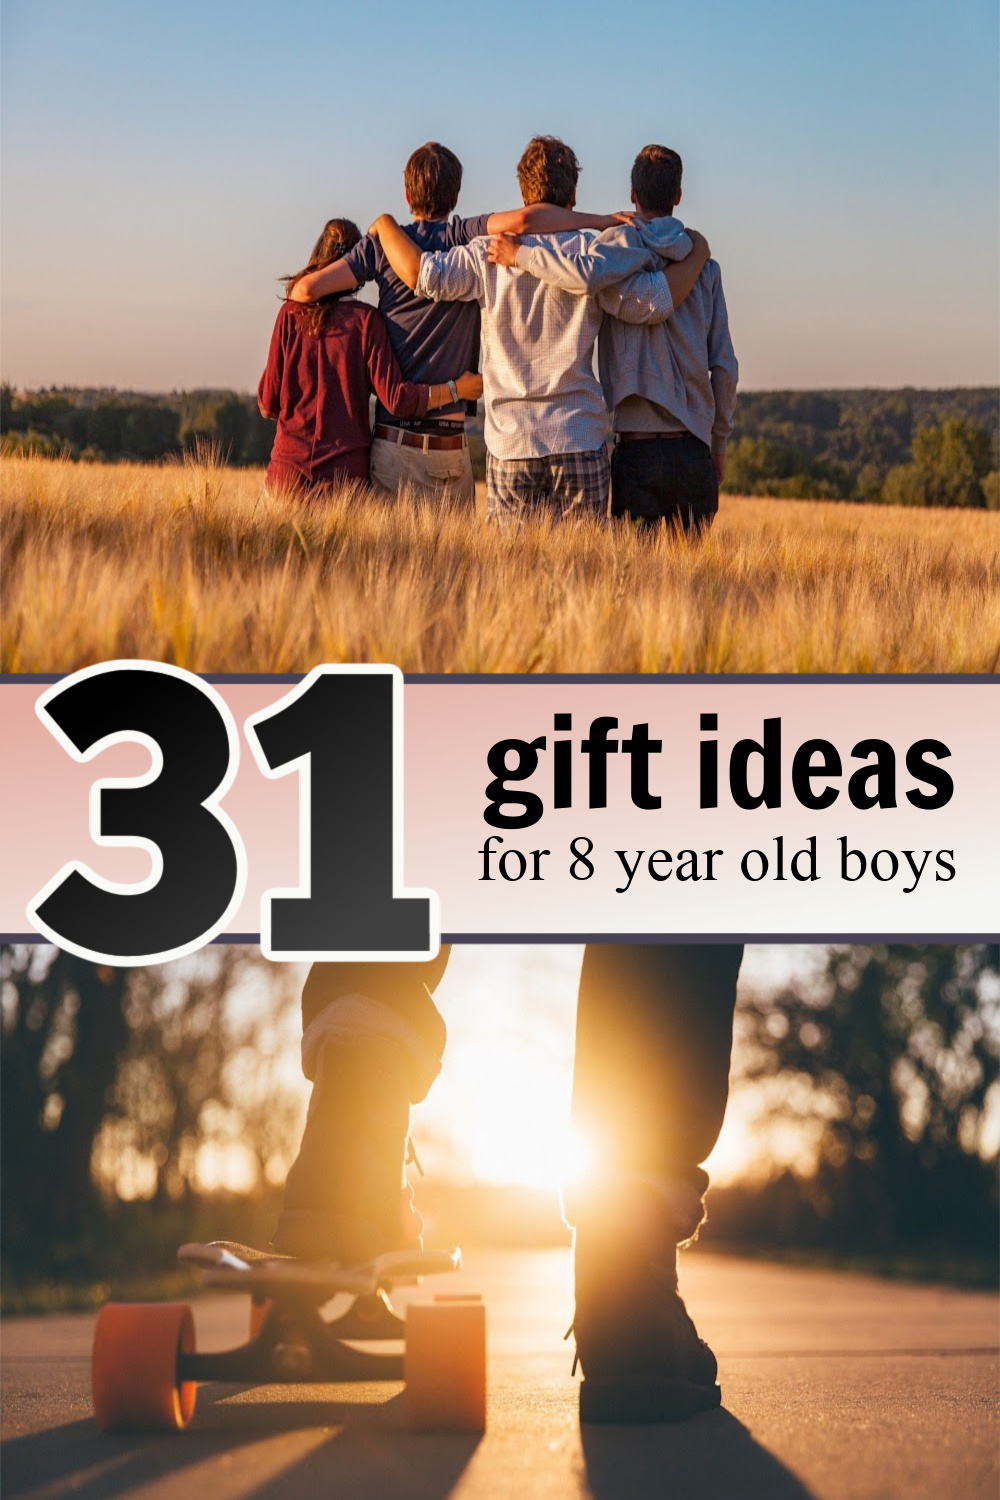 Gifts for 8 year olds